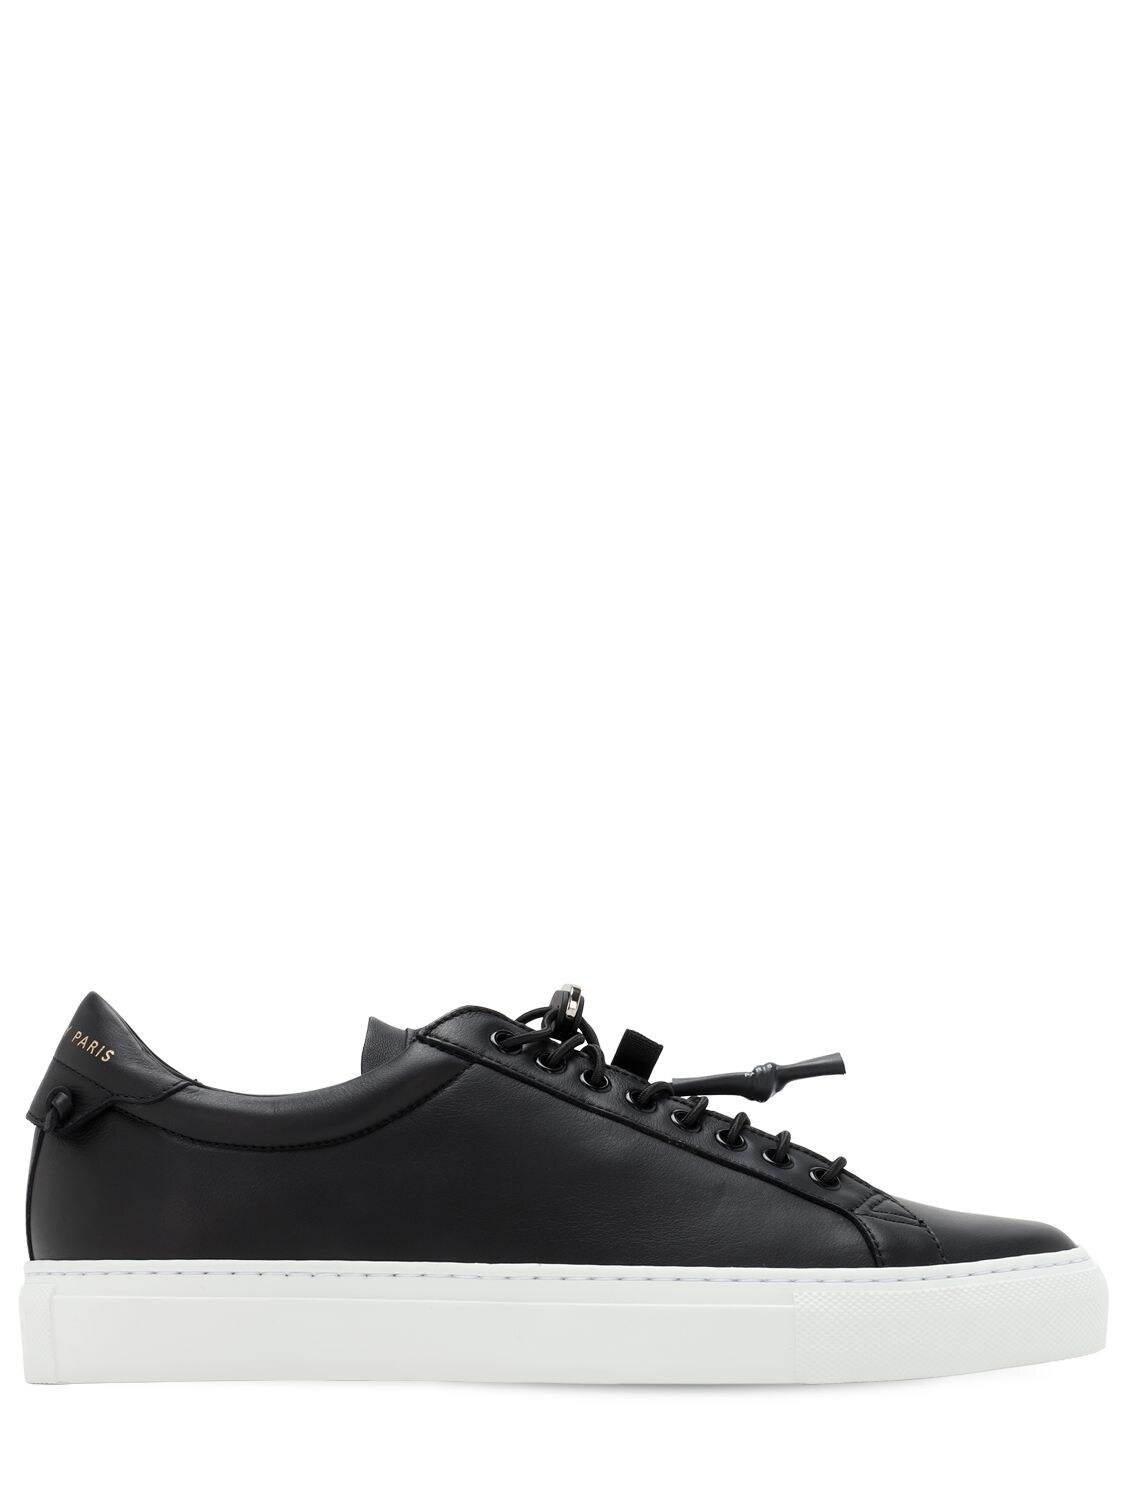 GIVENCHY URBAN STREET LEATHER LOW-TOP trainers,72ILE1006-MDAX0